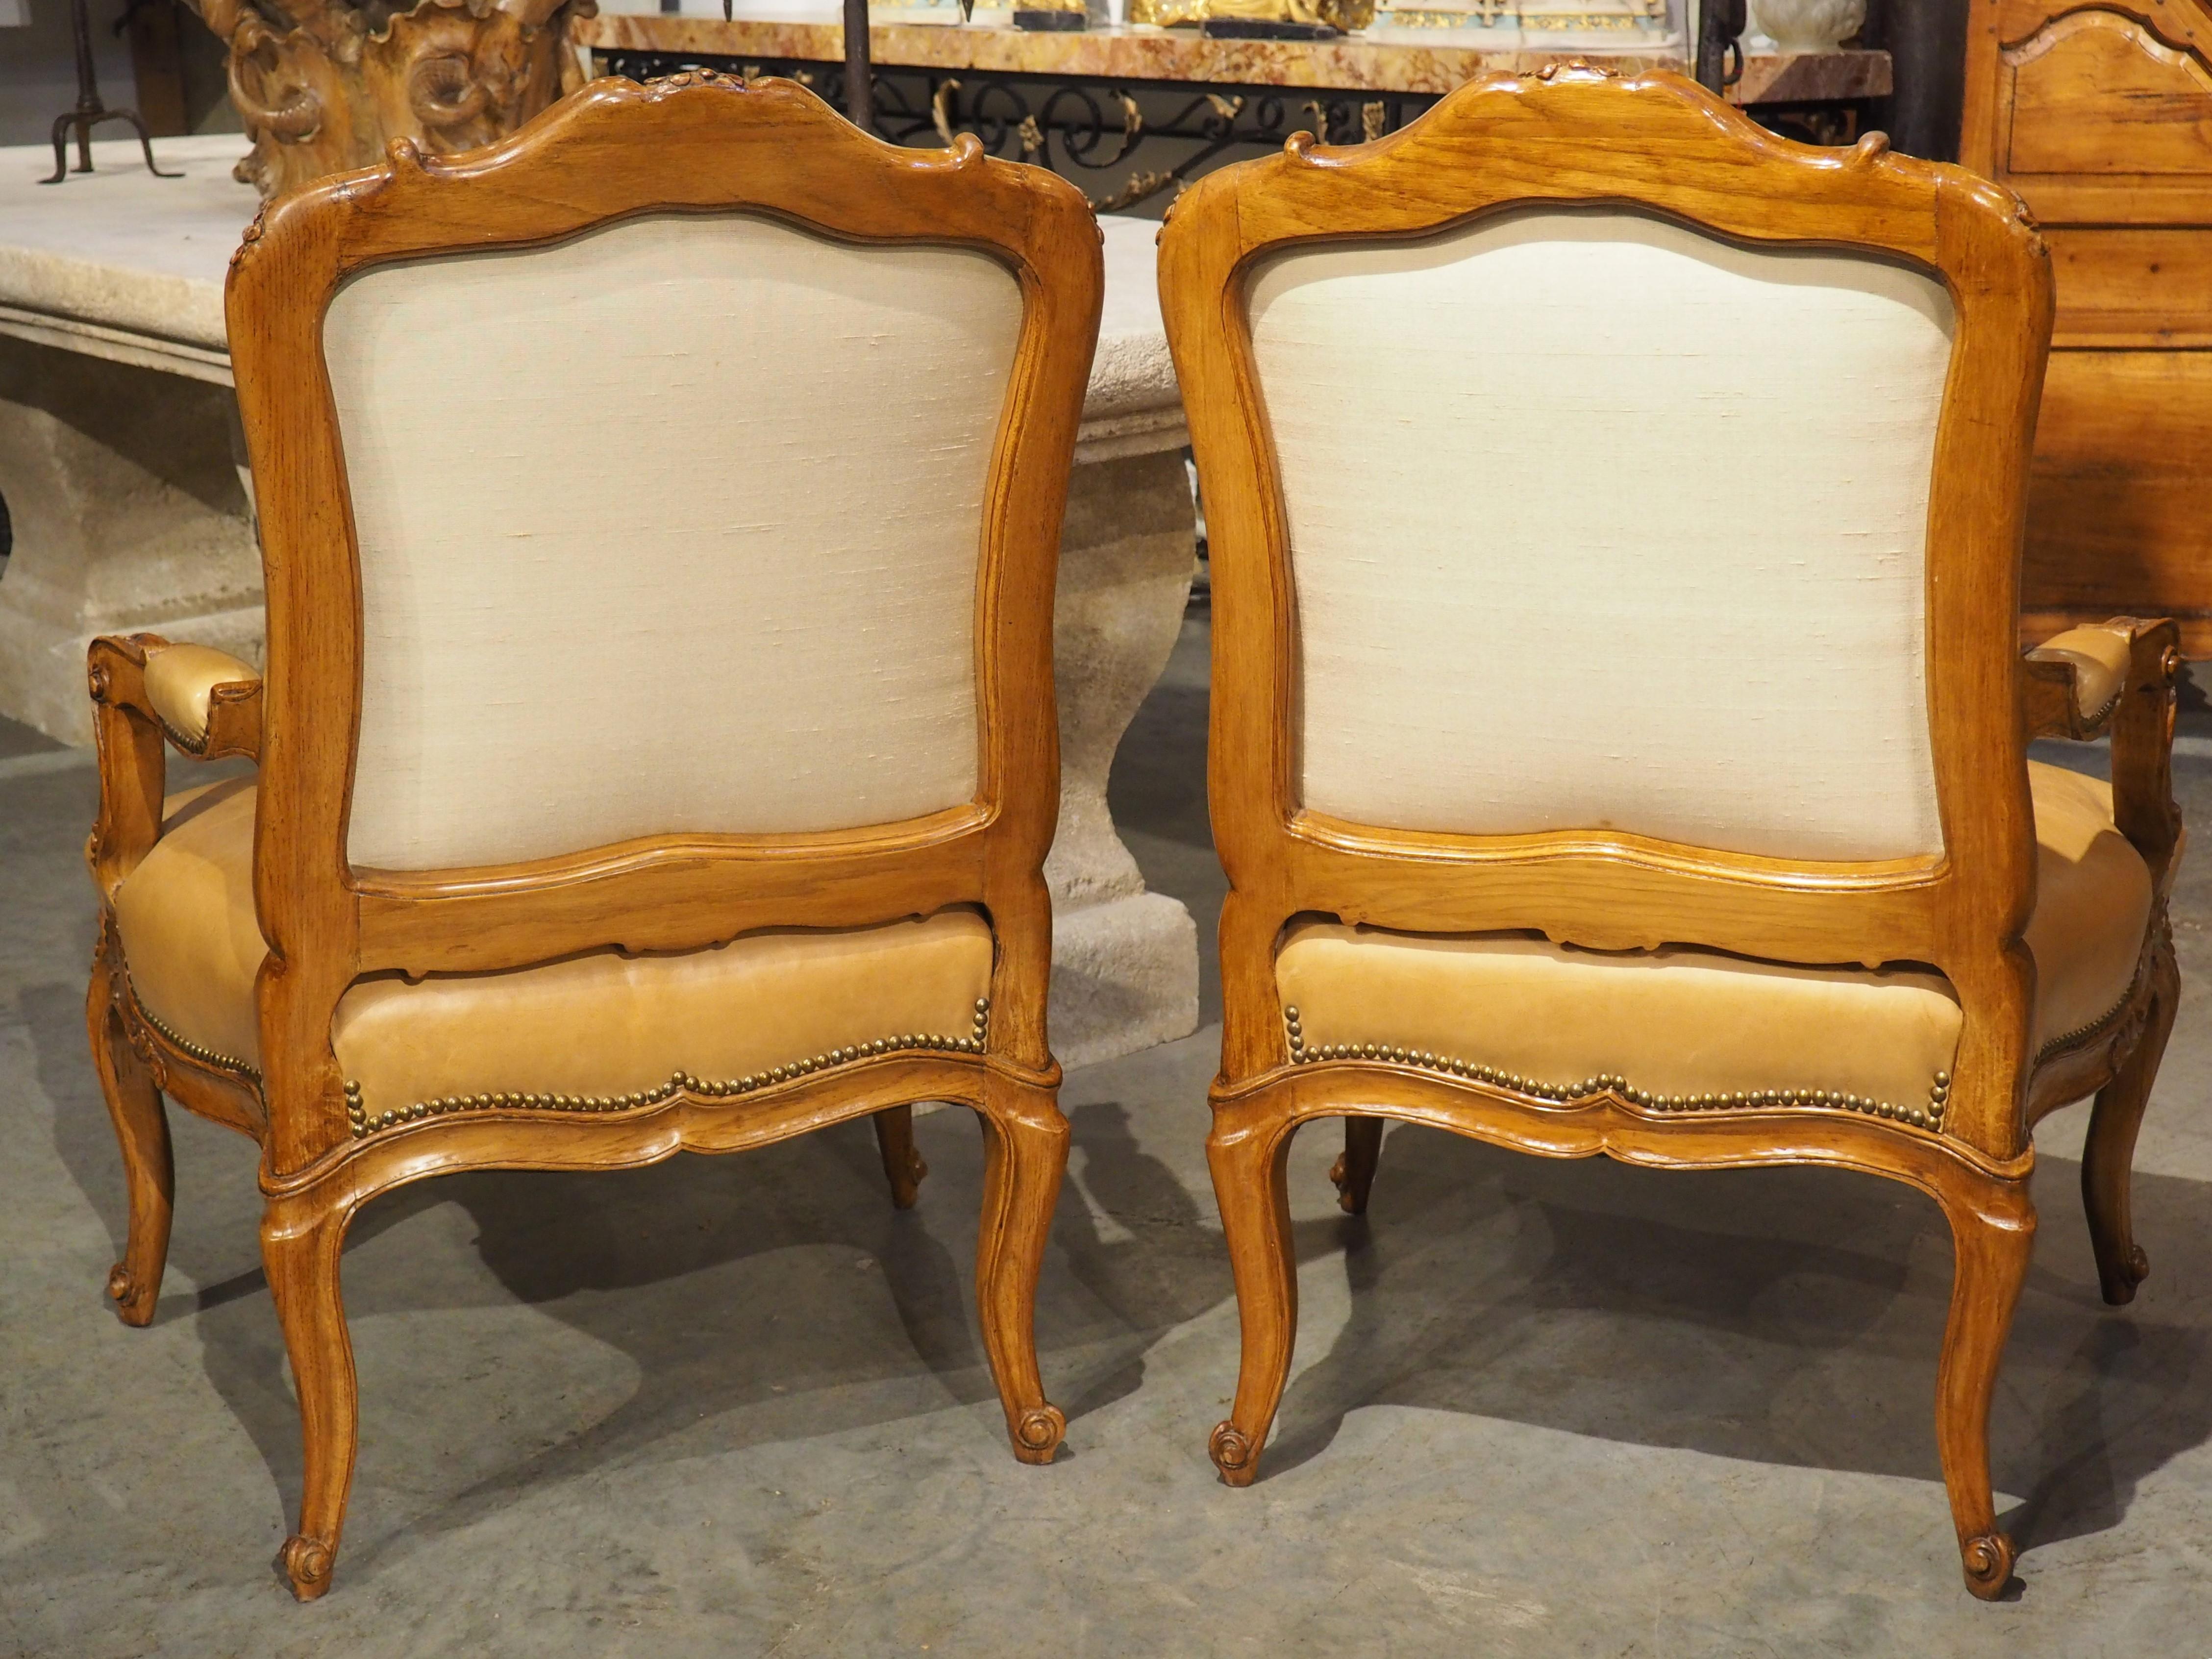 Pair of French Carved Regence Style Armchairs with Leather Upholstery, C. 1900 For Sale 5